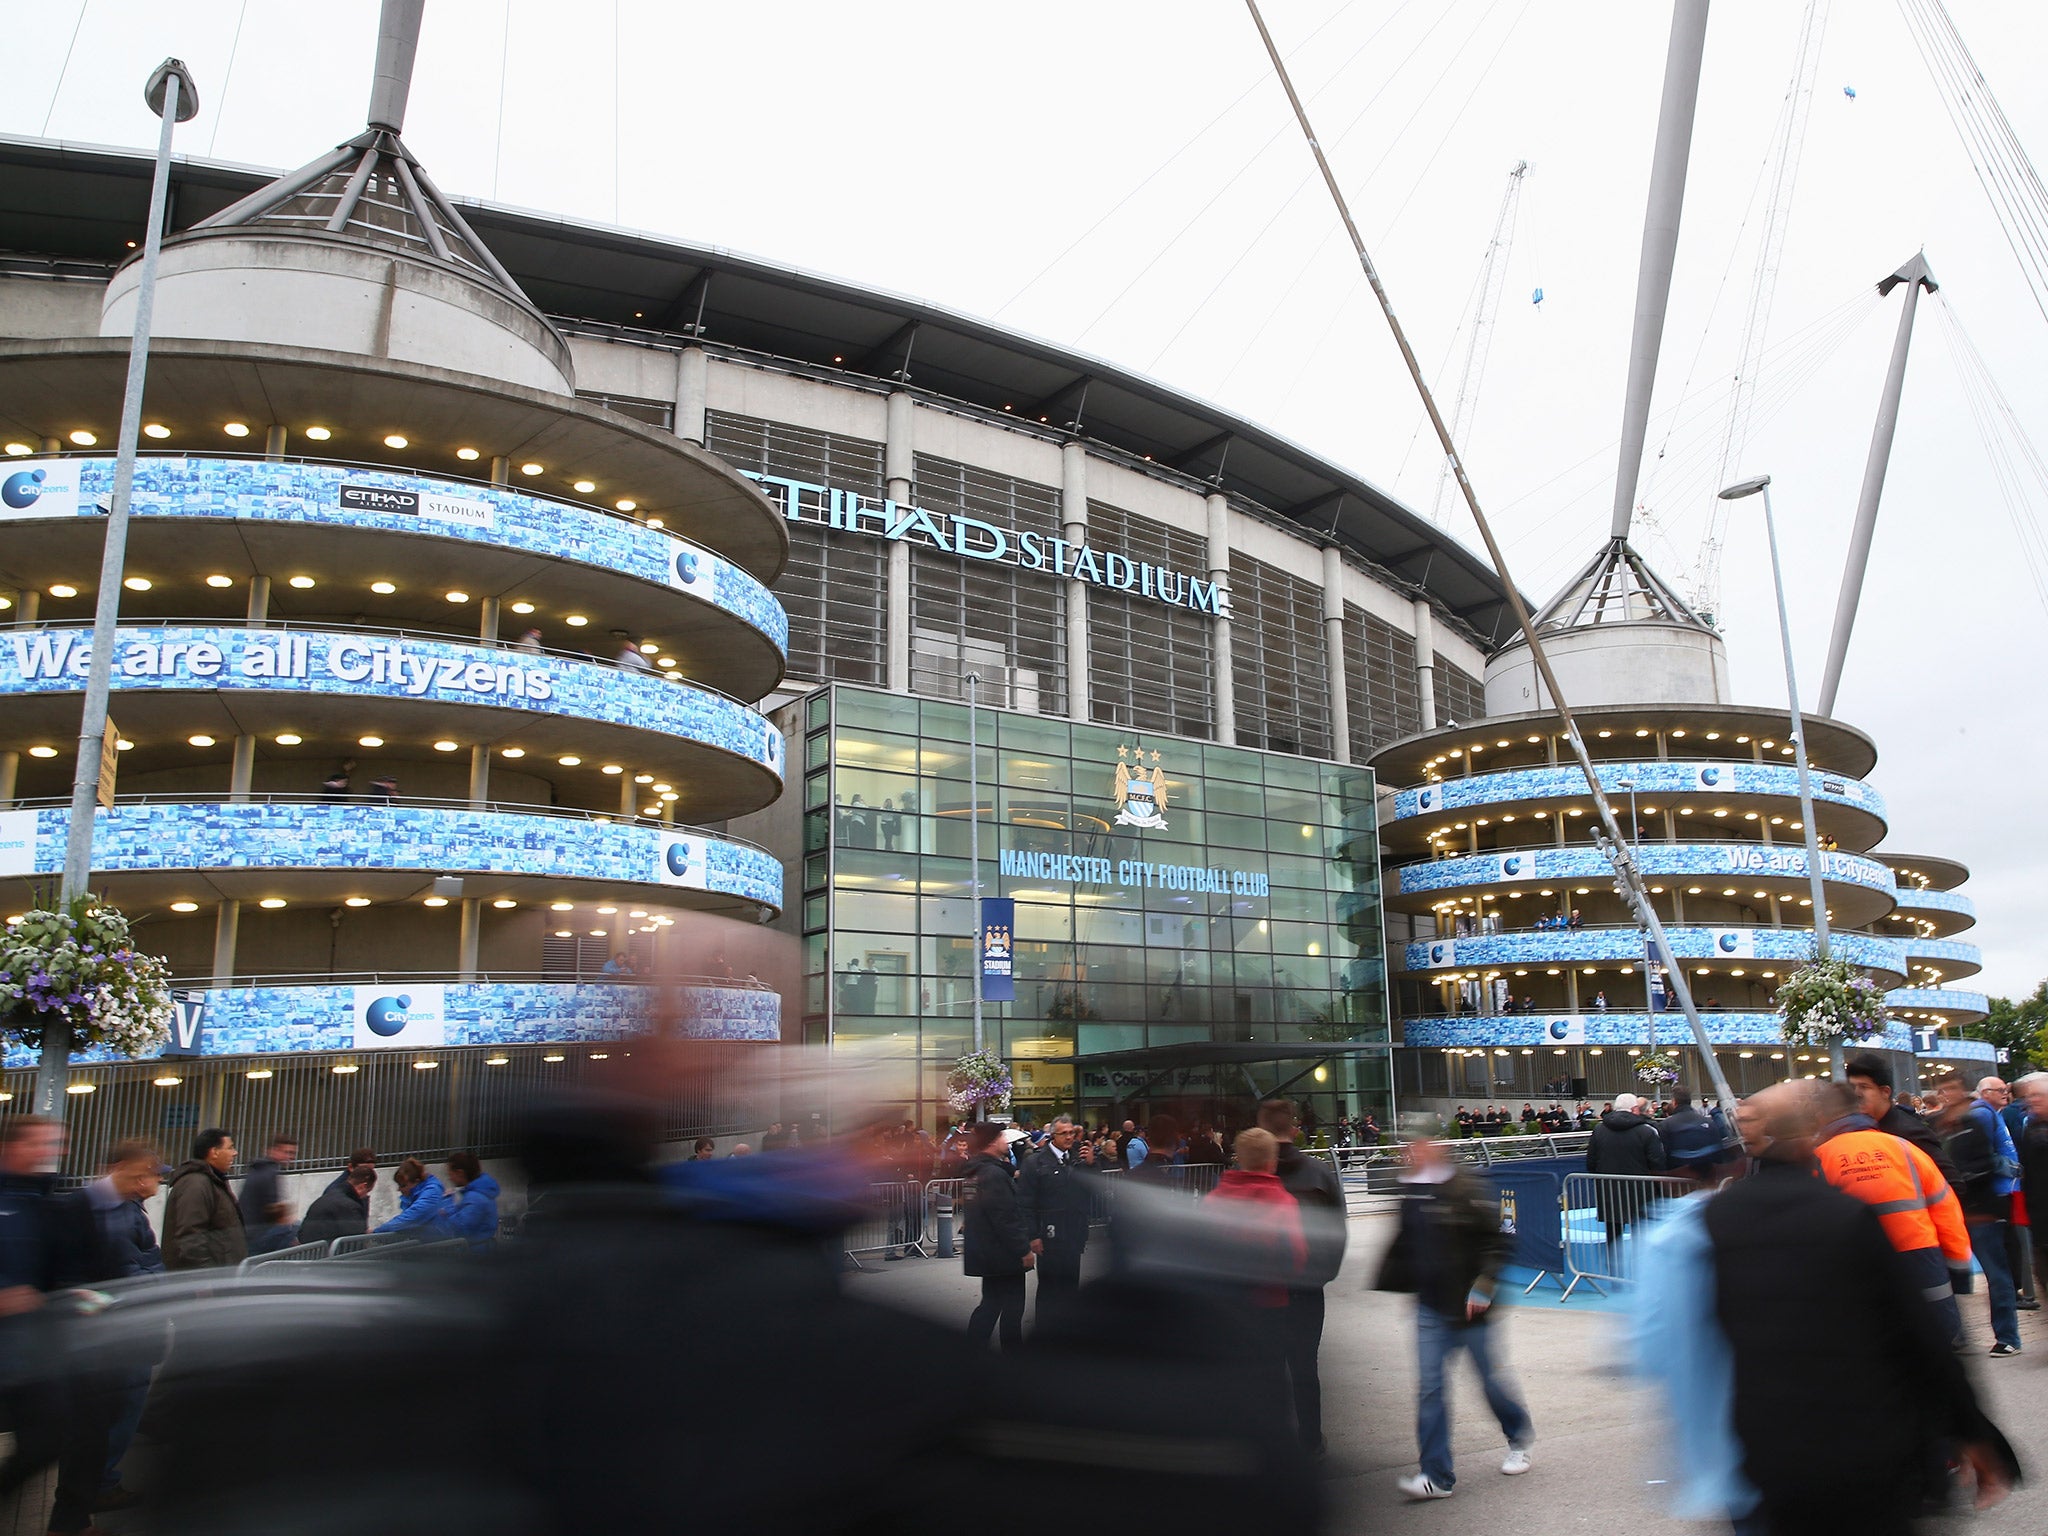 Over 45,000 are expected at the Etihad Stadium on Wednesday